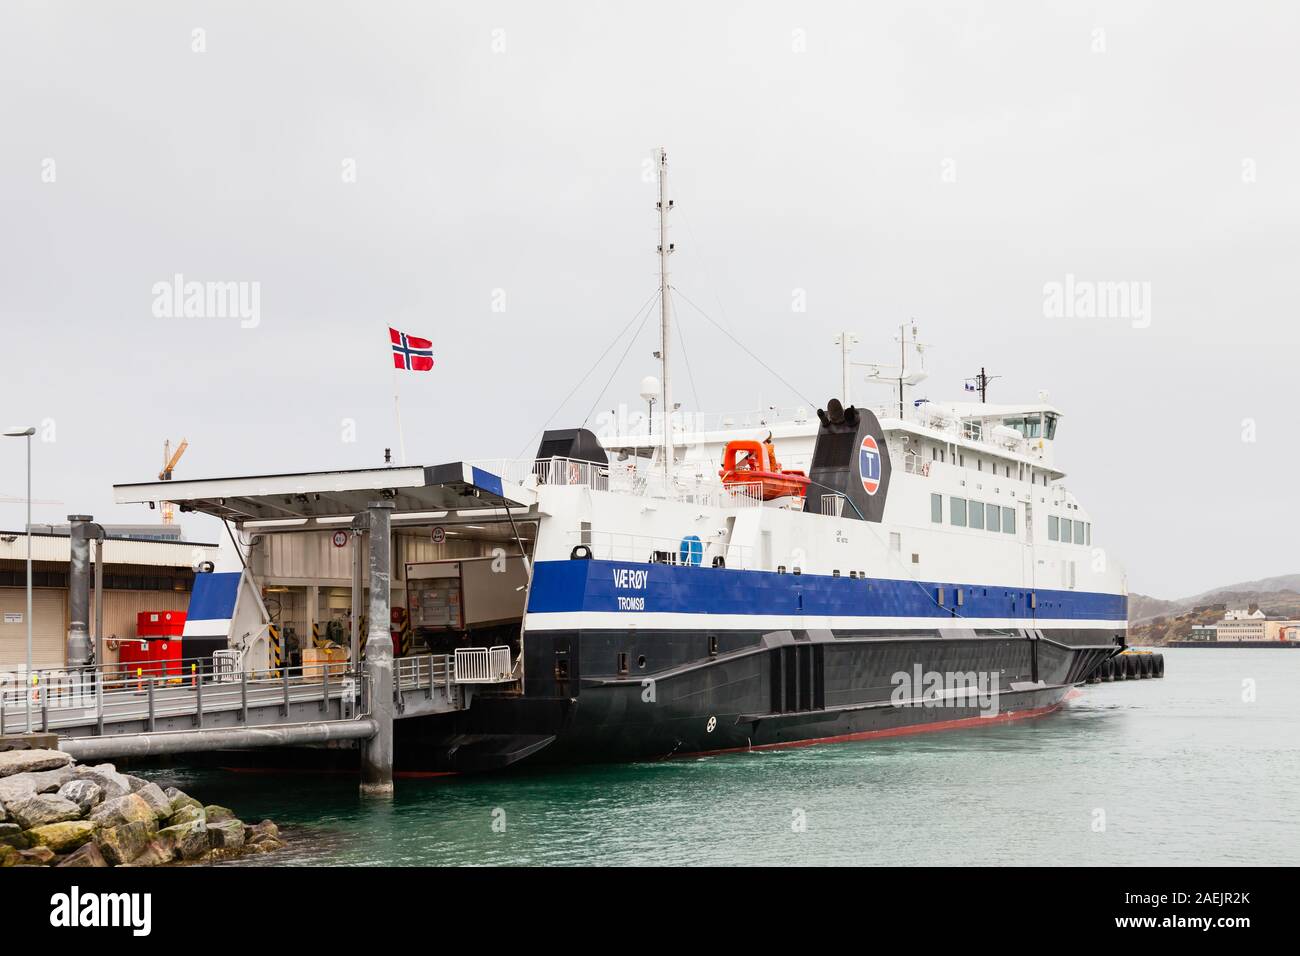 A view of Ro-Ro passenger ship, Vaeroy, moored in Bodo, Norway. Stock Photo